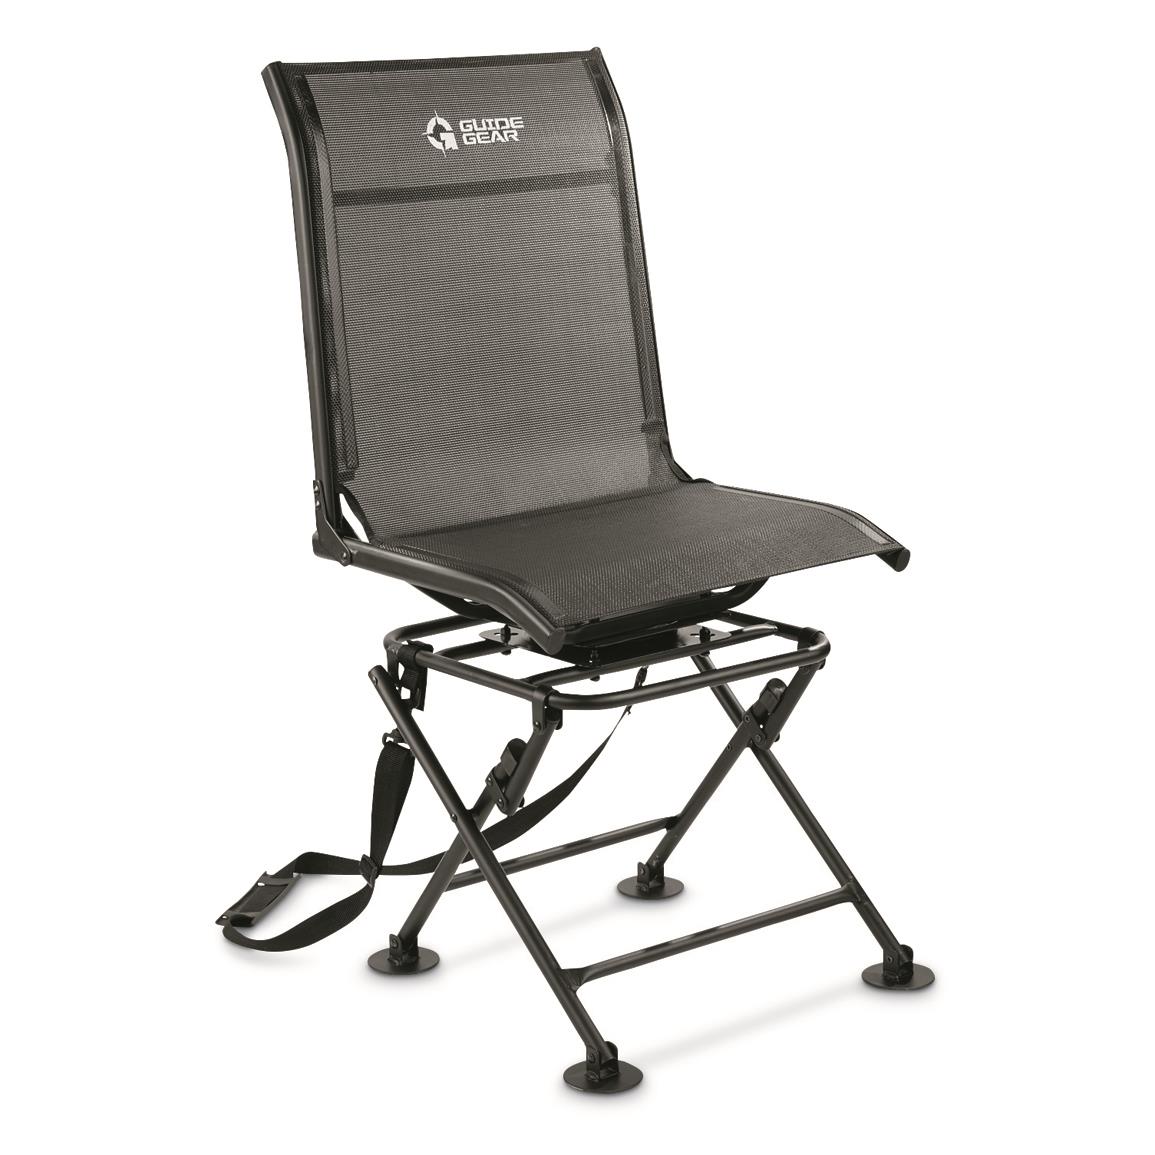 Guide Gear 360 Degree Swivel Hunting Blind Chair 583295 Stools Chairs Seat Cushions At Sportsman S Guide